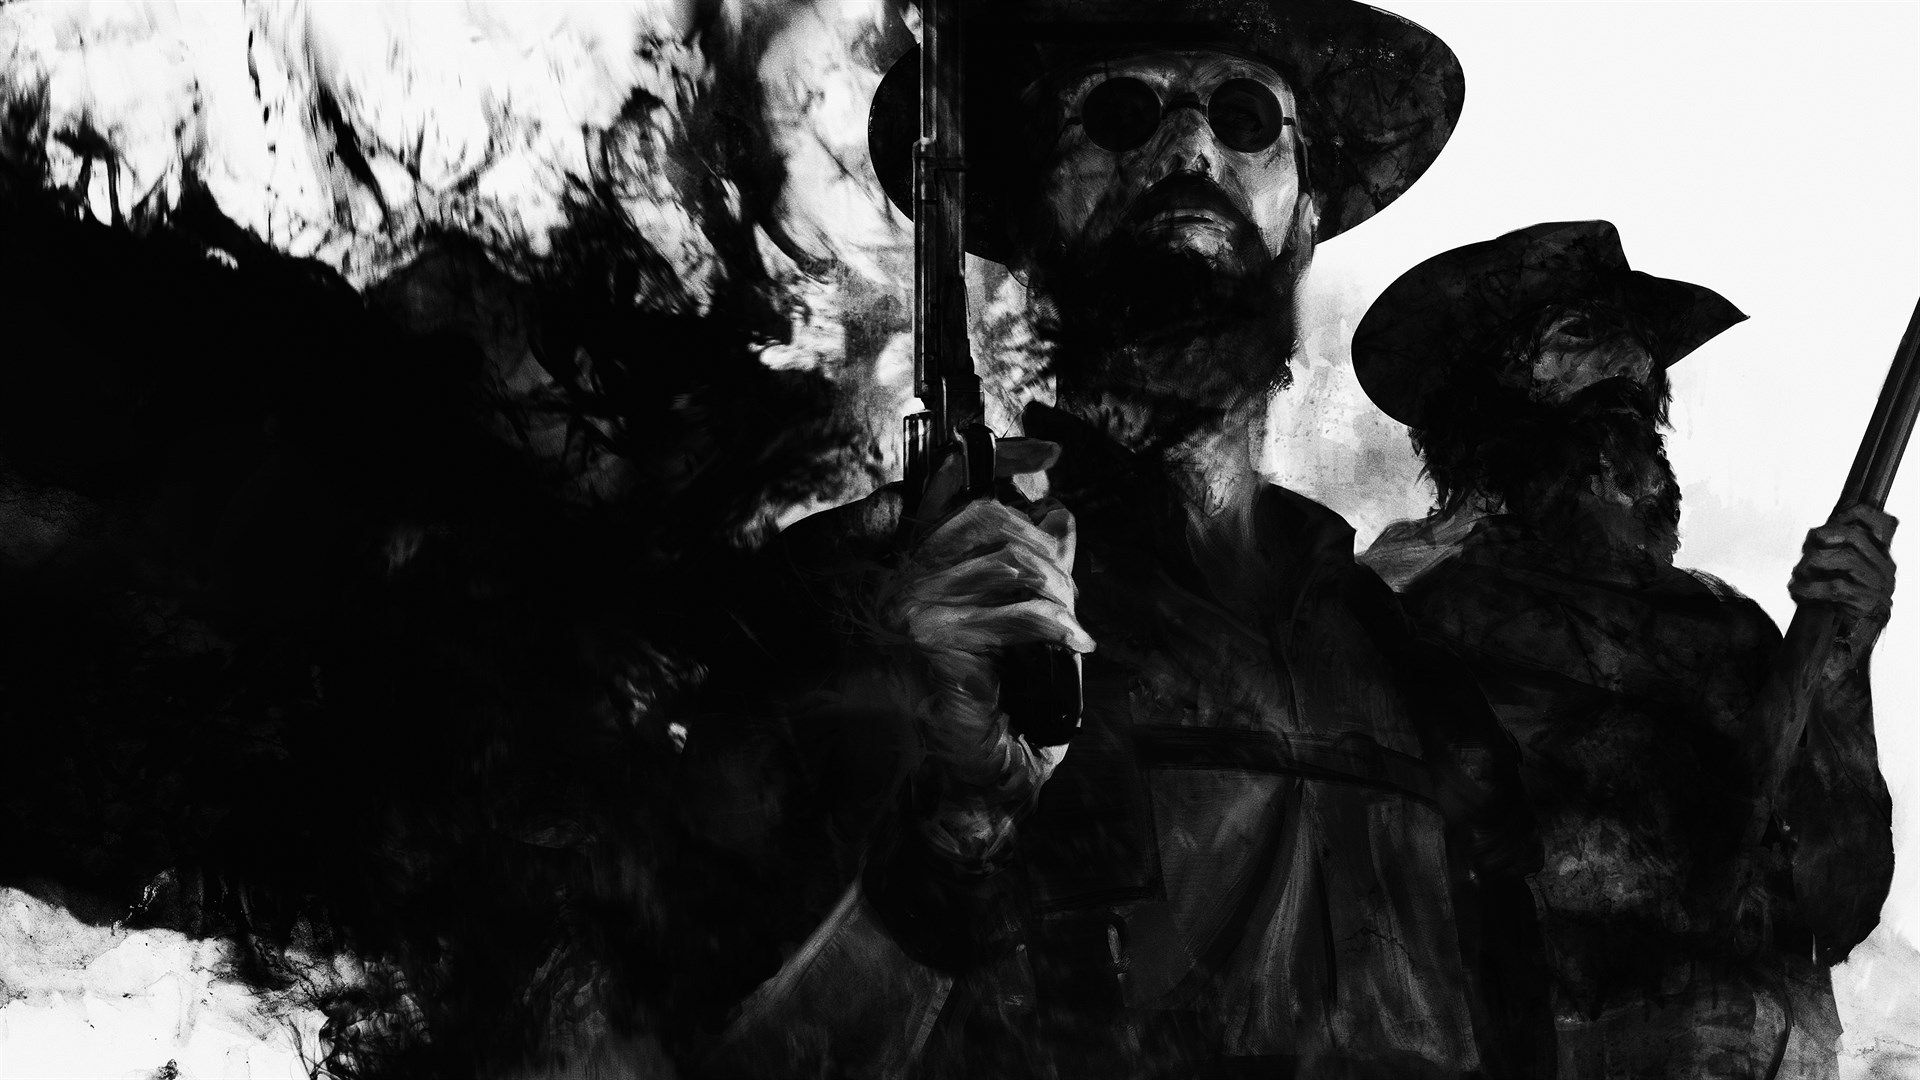 Taking a look at Hunt: Showdown in Xbox Game Preview